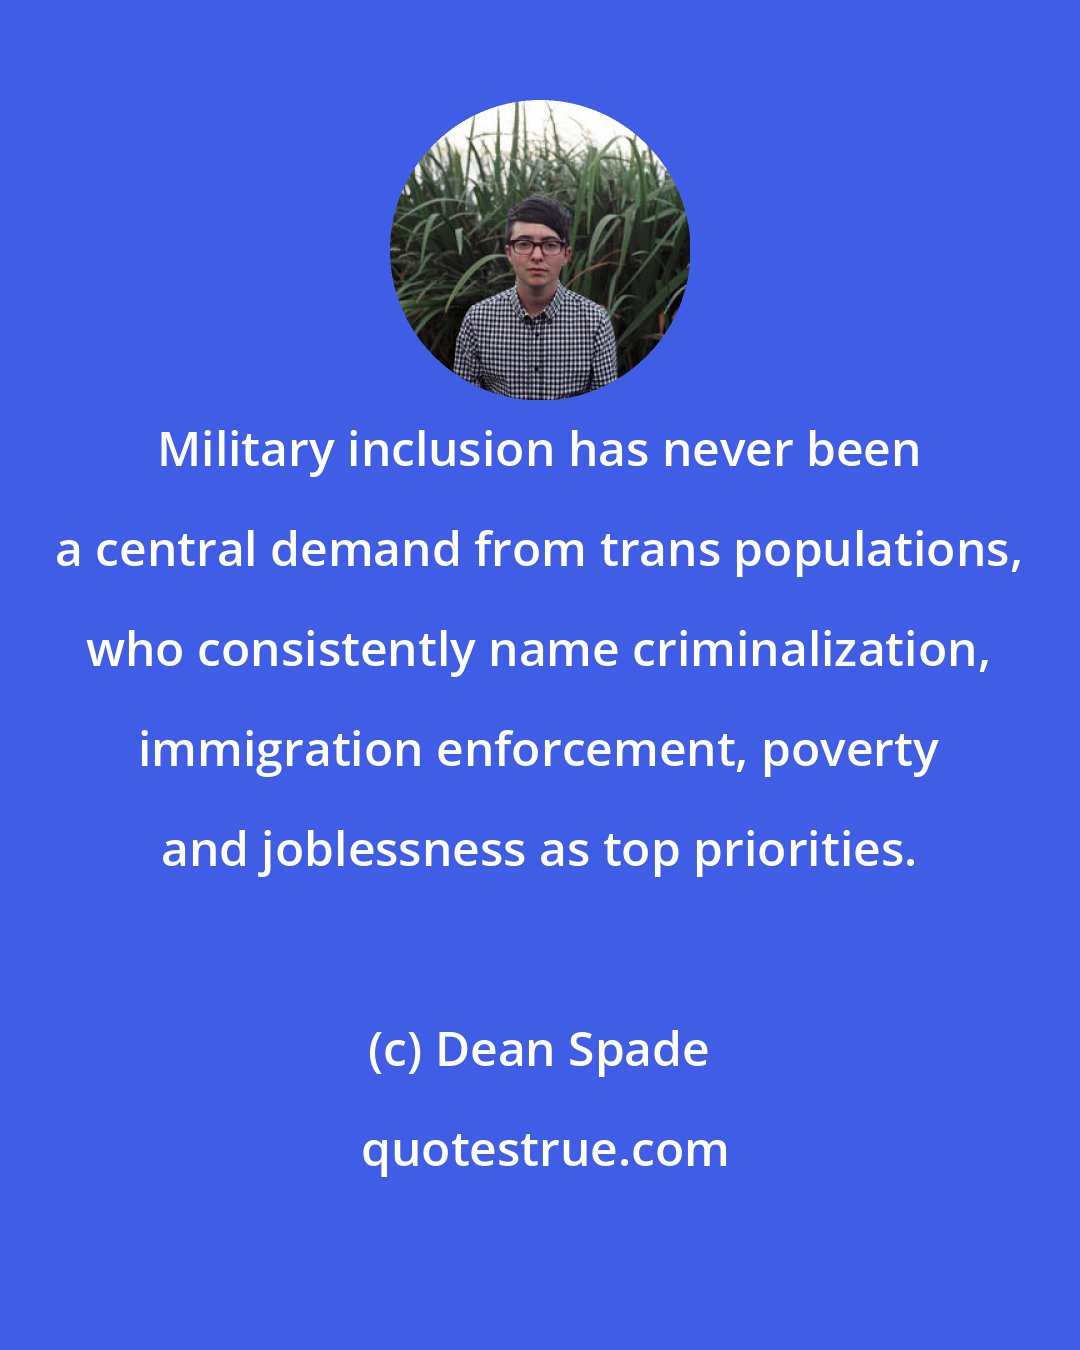 Dean Spade: Military inclusion has never been a central demand from trans populations, who consistently name criminalization, immigration enforcement, poverty and joblessness as top priorities.